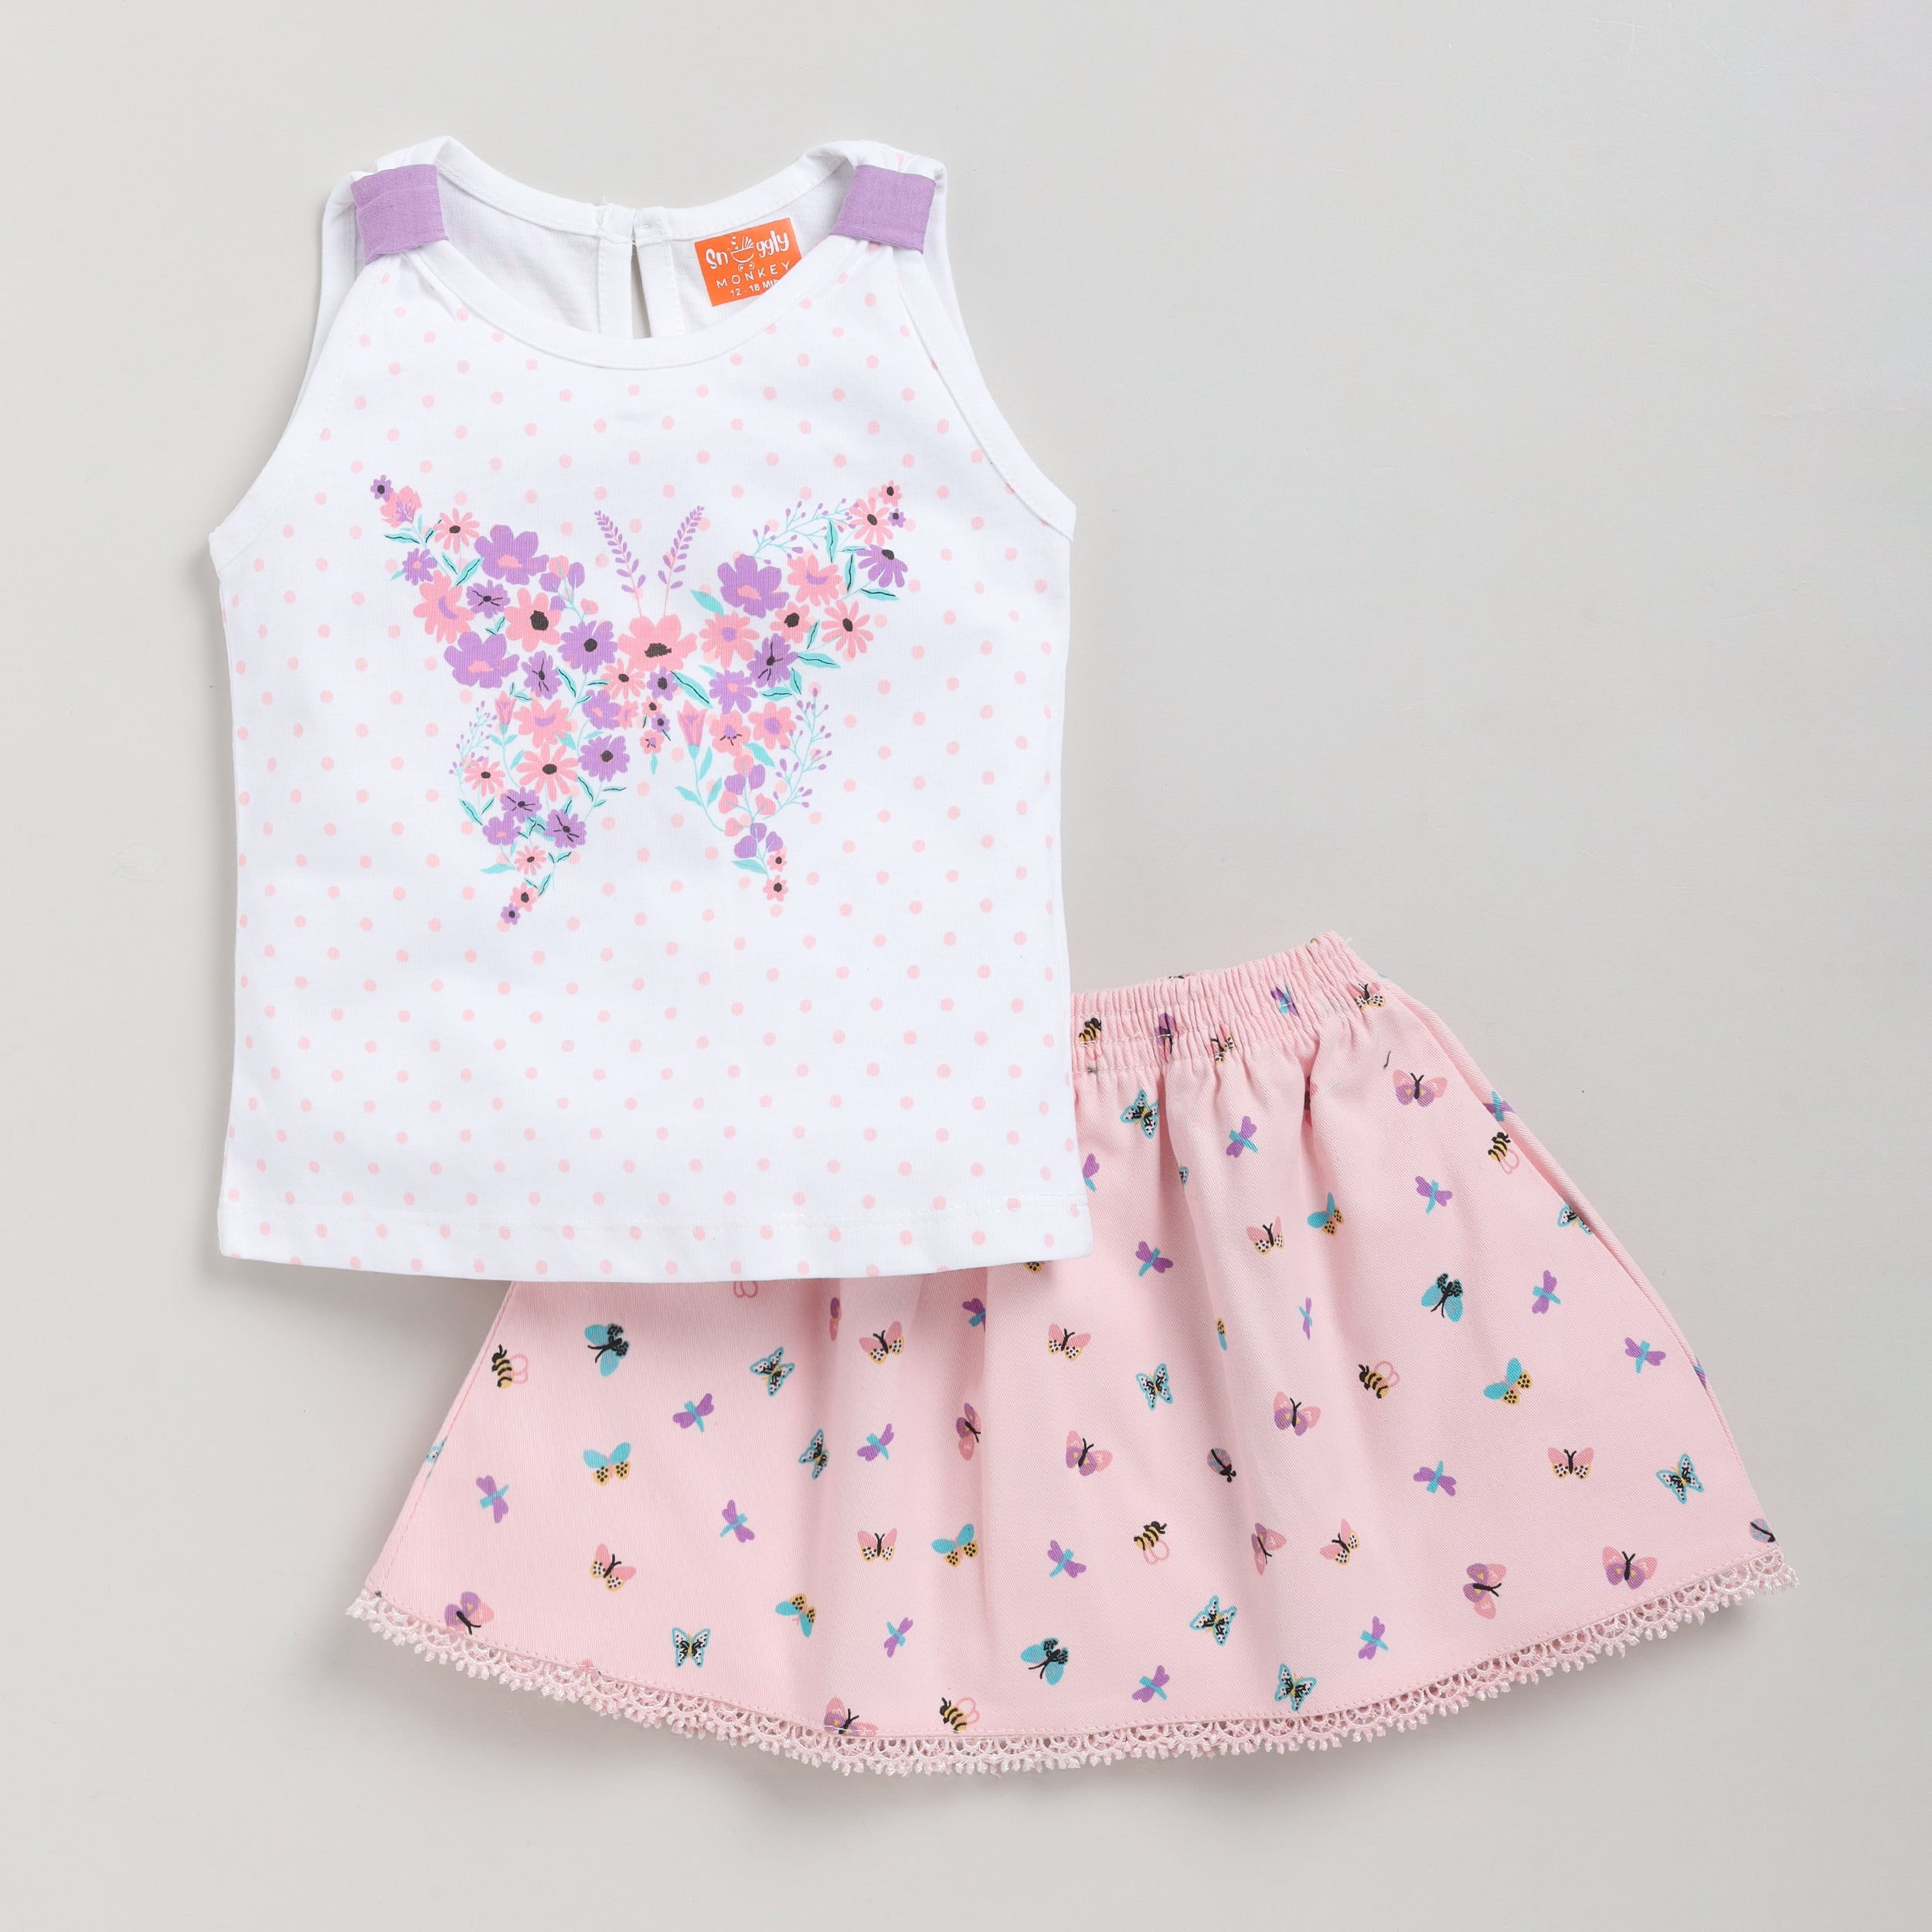 Snuggly Monkey Butterly Design Top with Skirt for Summer - Pink